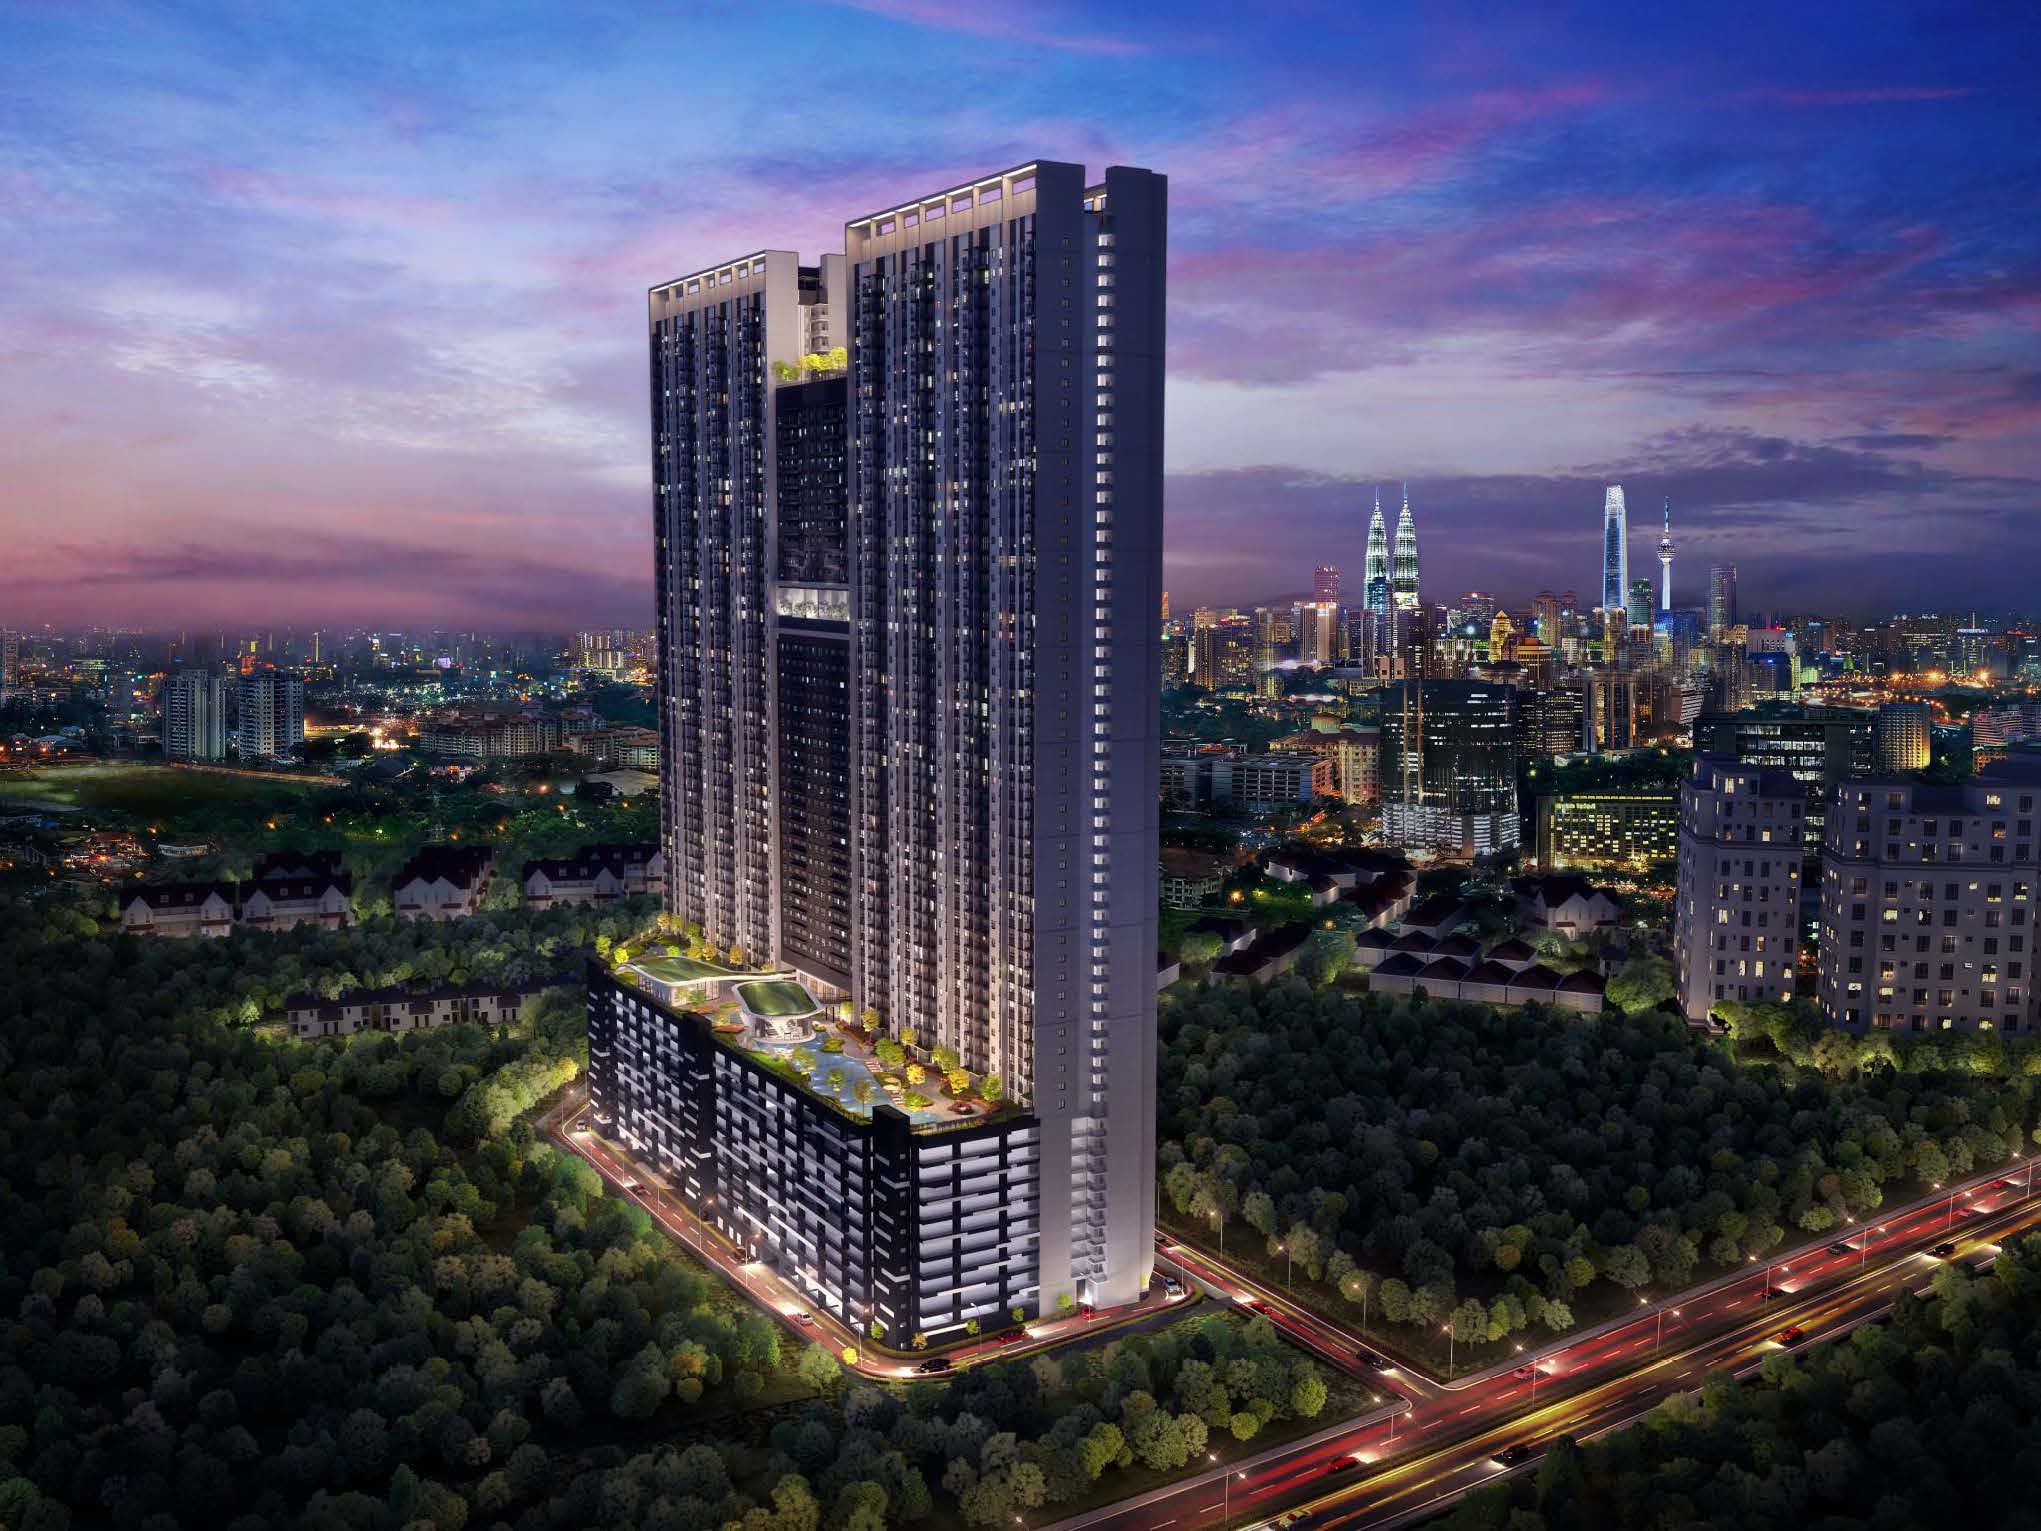 M Arisa at Sentul: Smart Living for The Contemporary Family